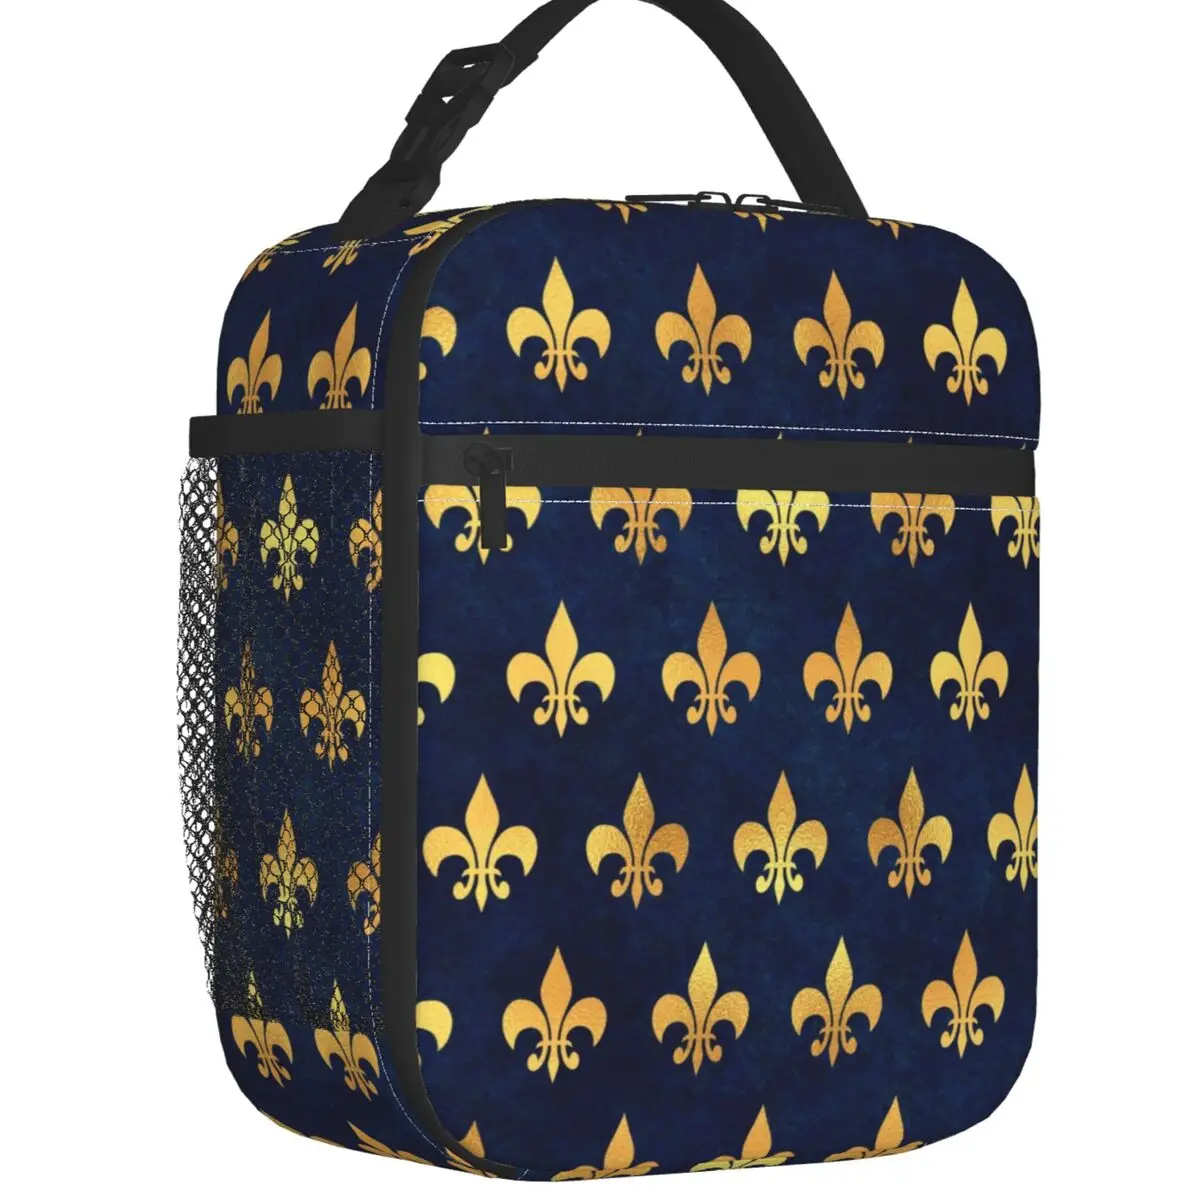 

Royal Gold Blue Grunge Fleur De Lis Lily Flower Insulated Lunch Bag for Outdoor Picnic Cooler Thermal Bento Box Women Kids